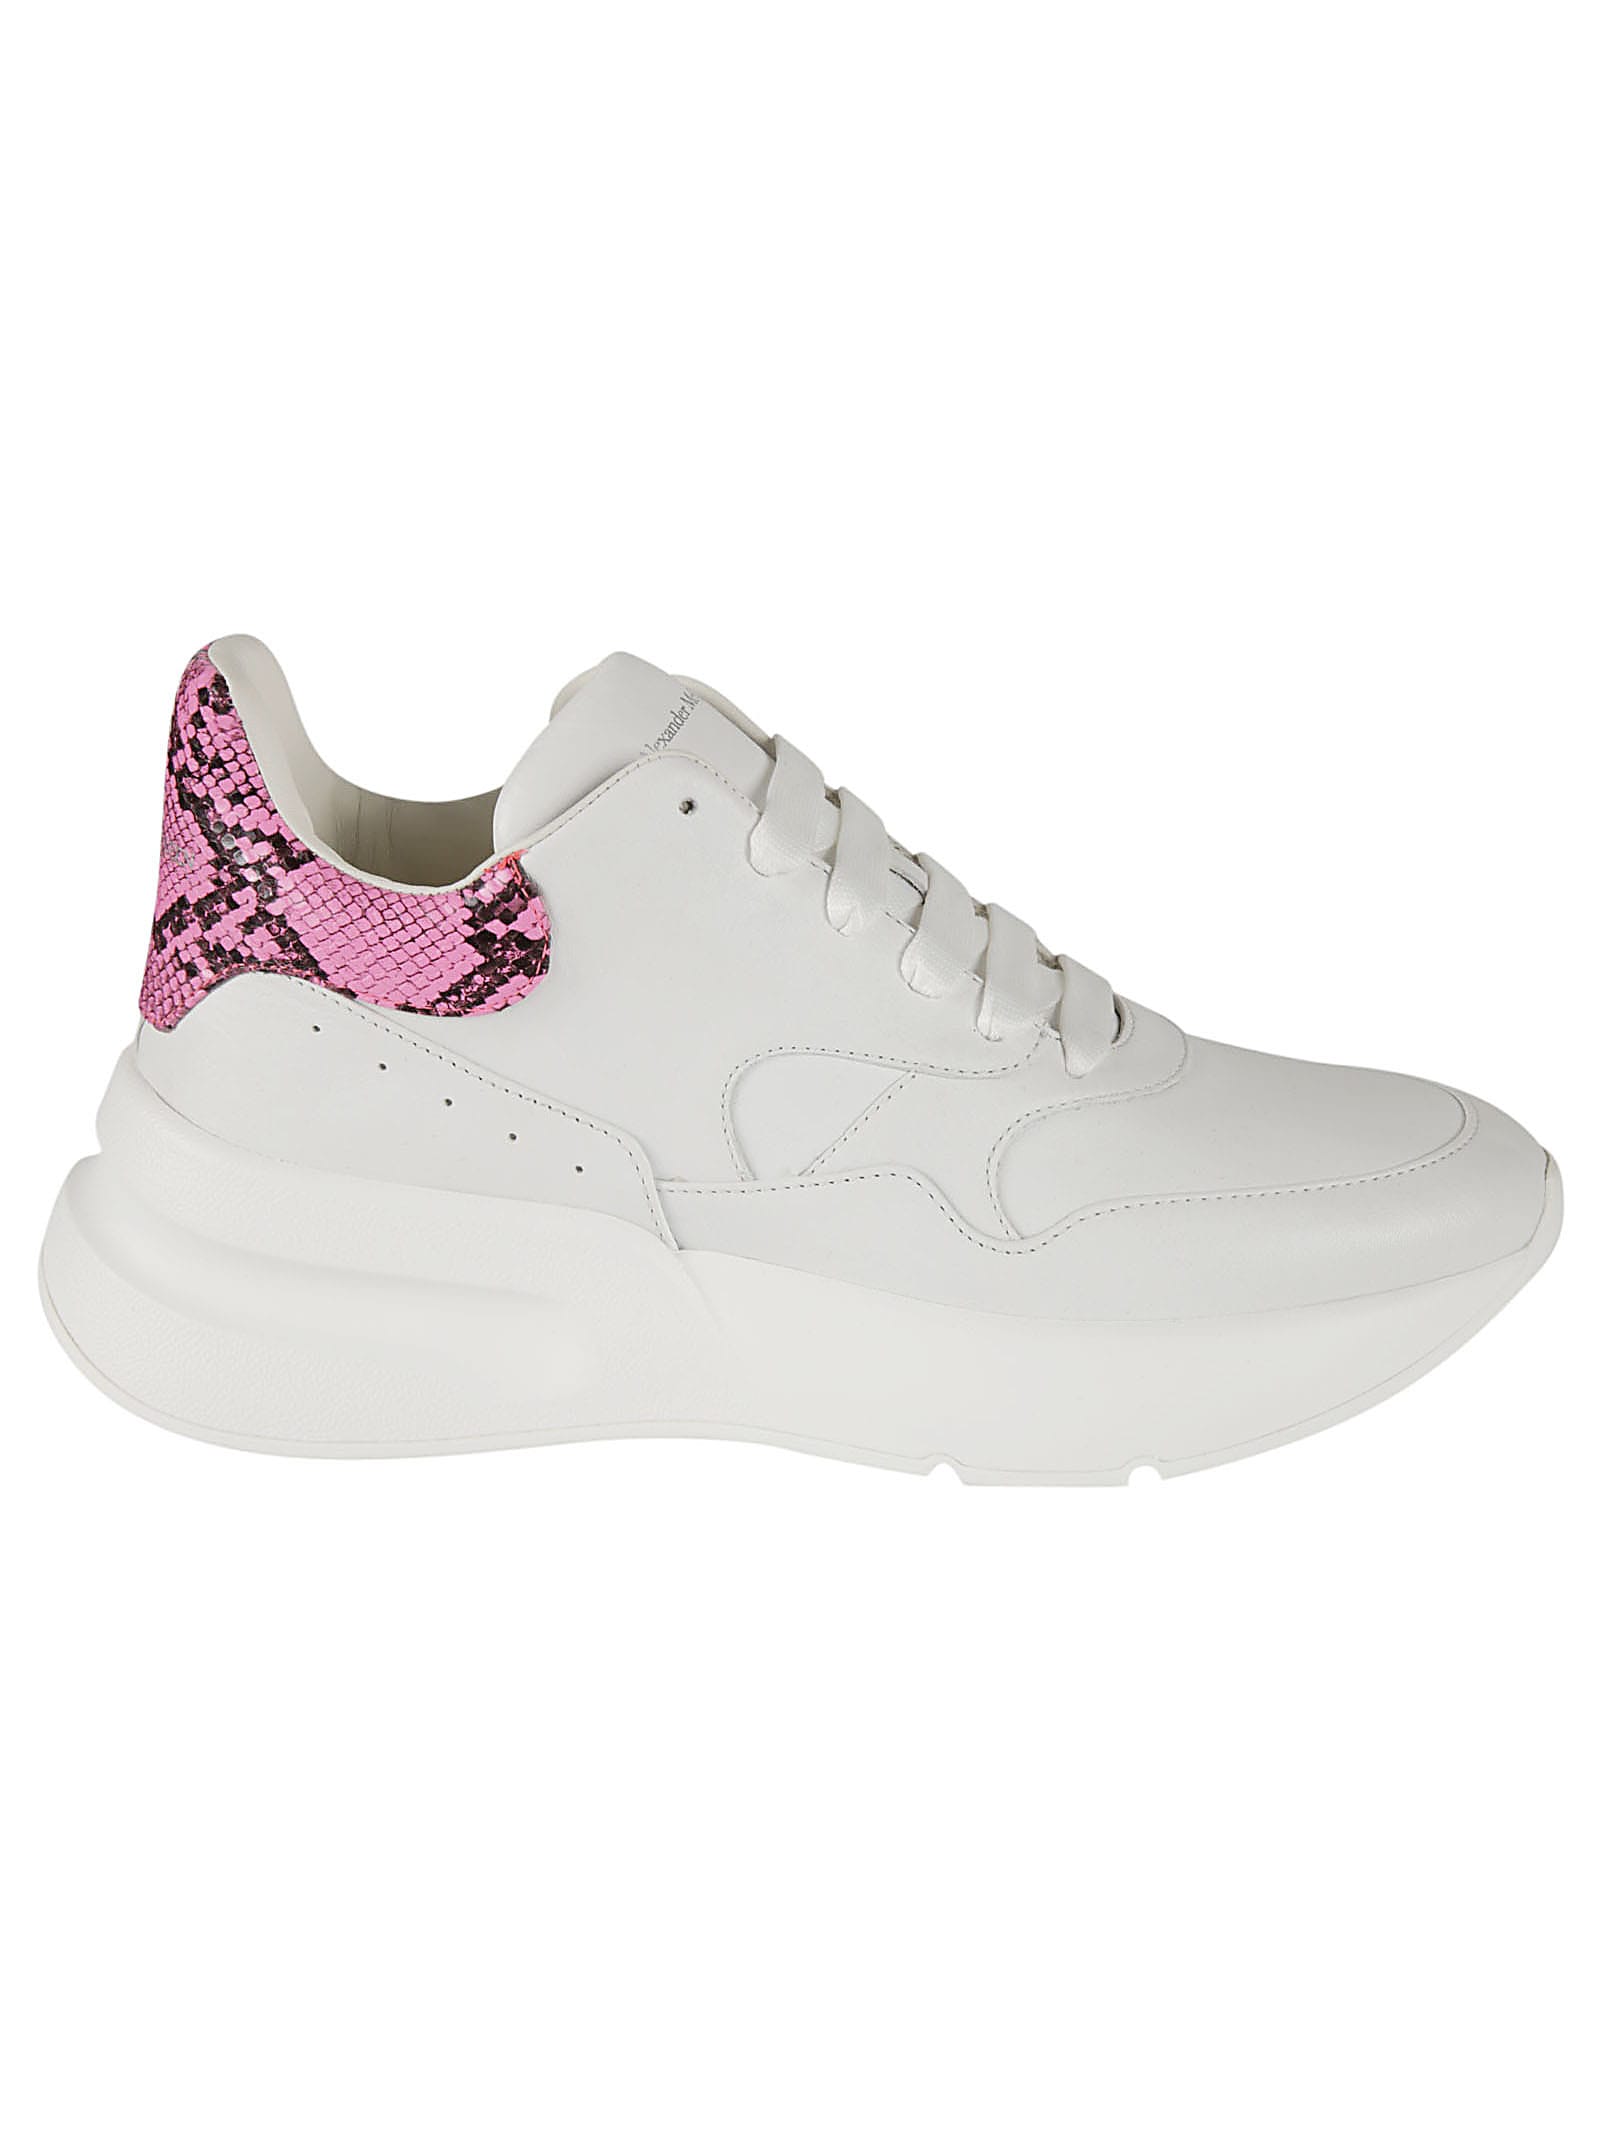 Alexander Mcqueen Back Snake Print Trainers In White/pink